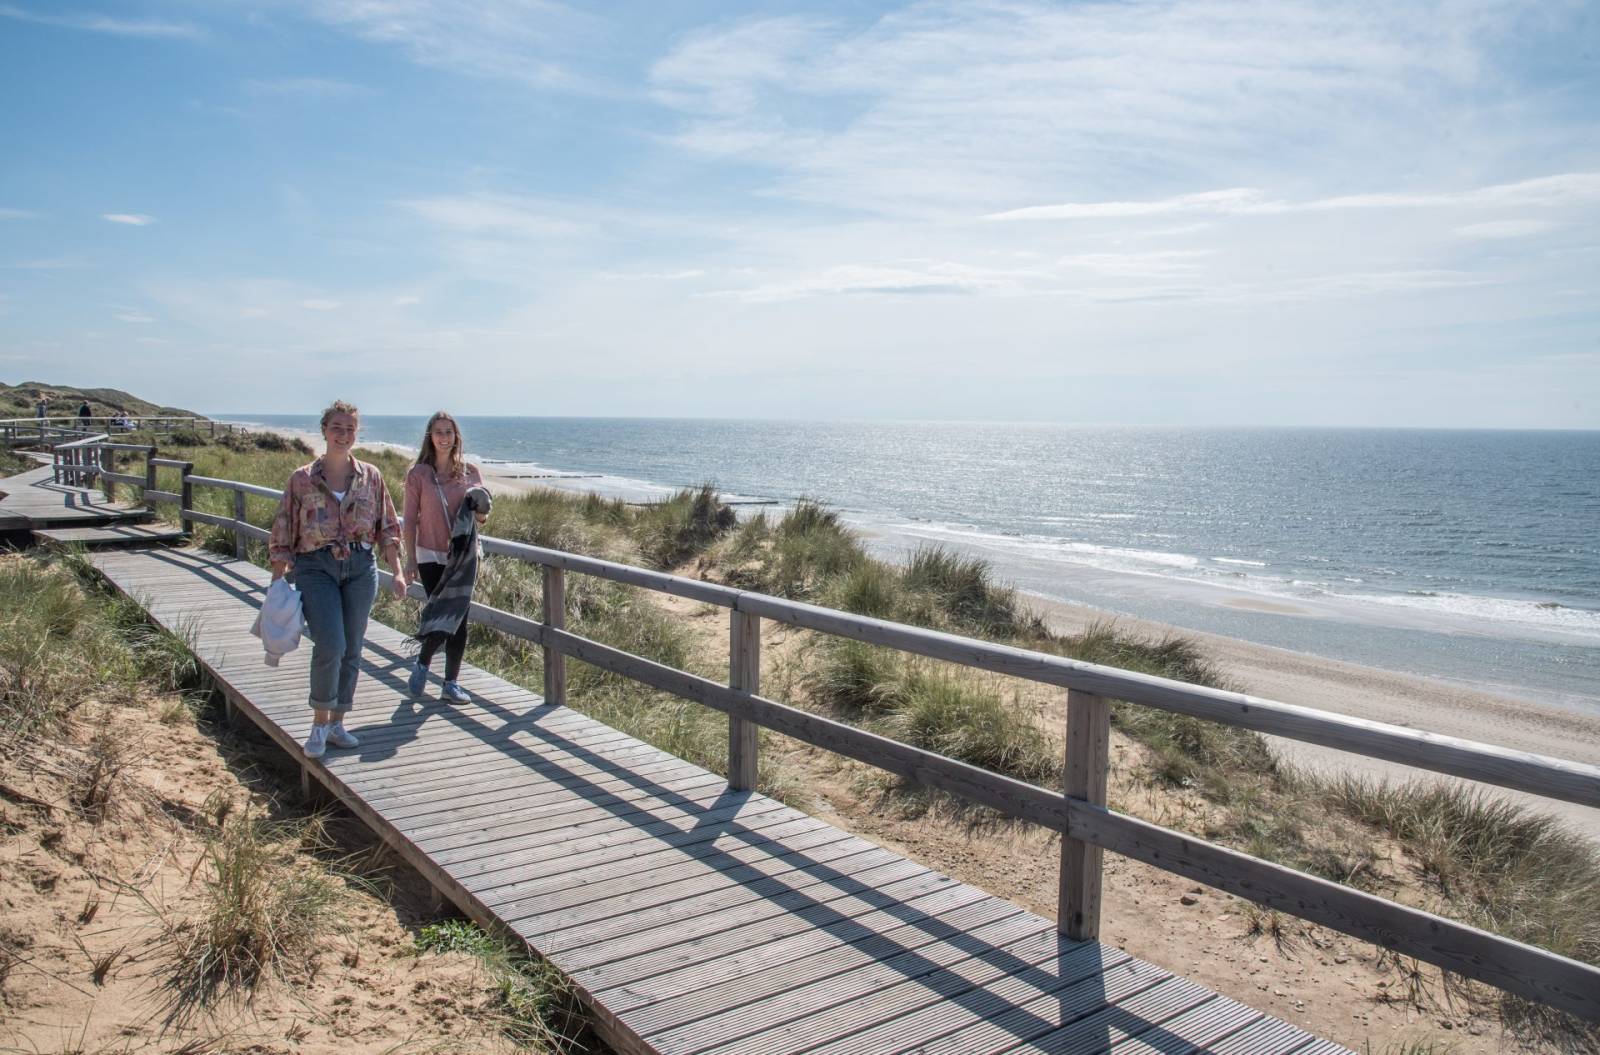 Sylt trip: The most beautiful destinations.